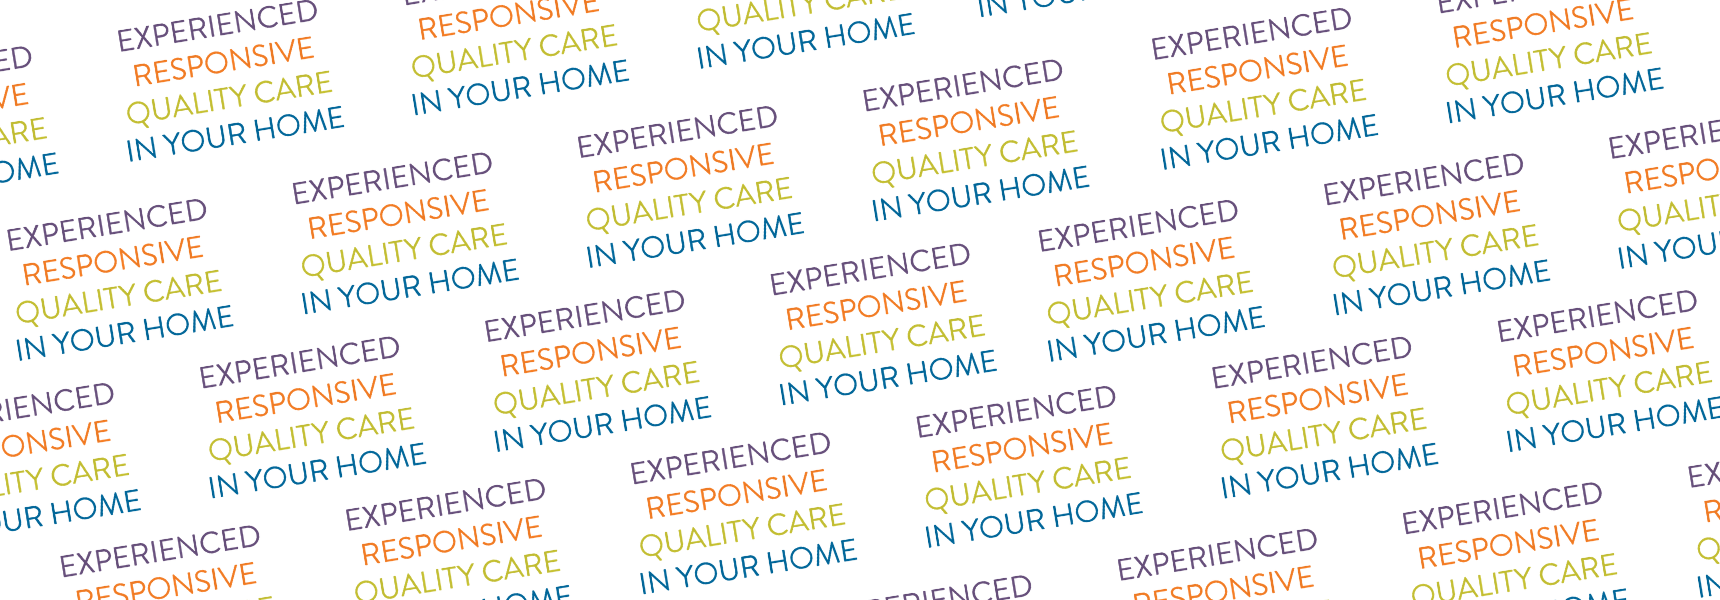 Graphic with words: Expreienced, Responsive, Quality Care in your Home